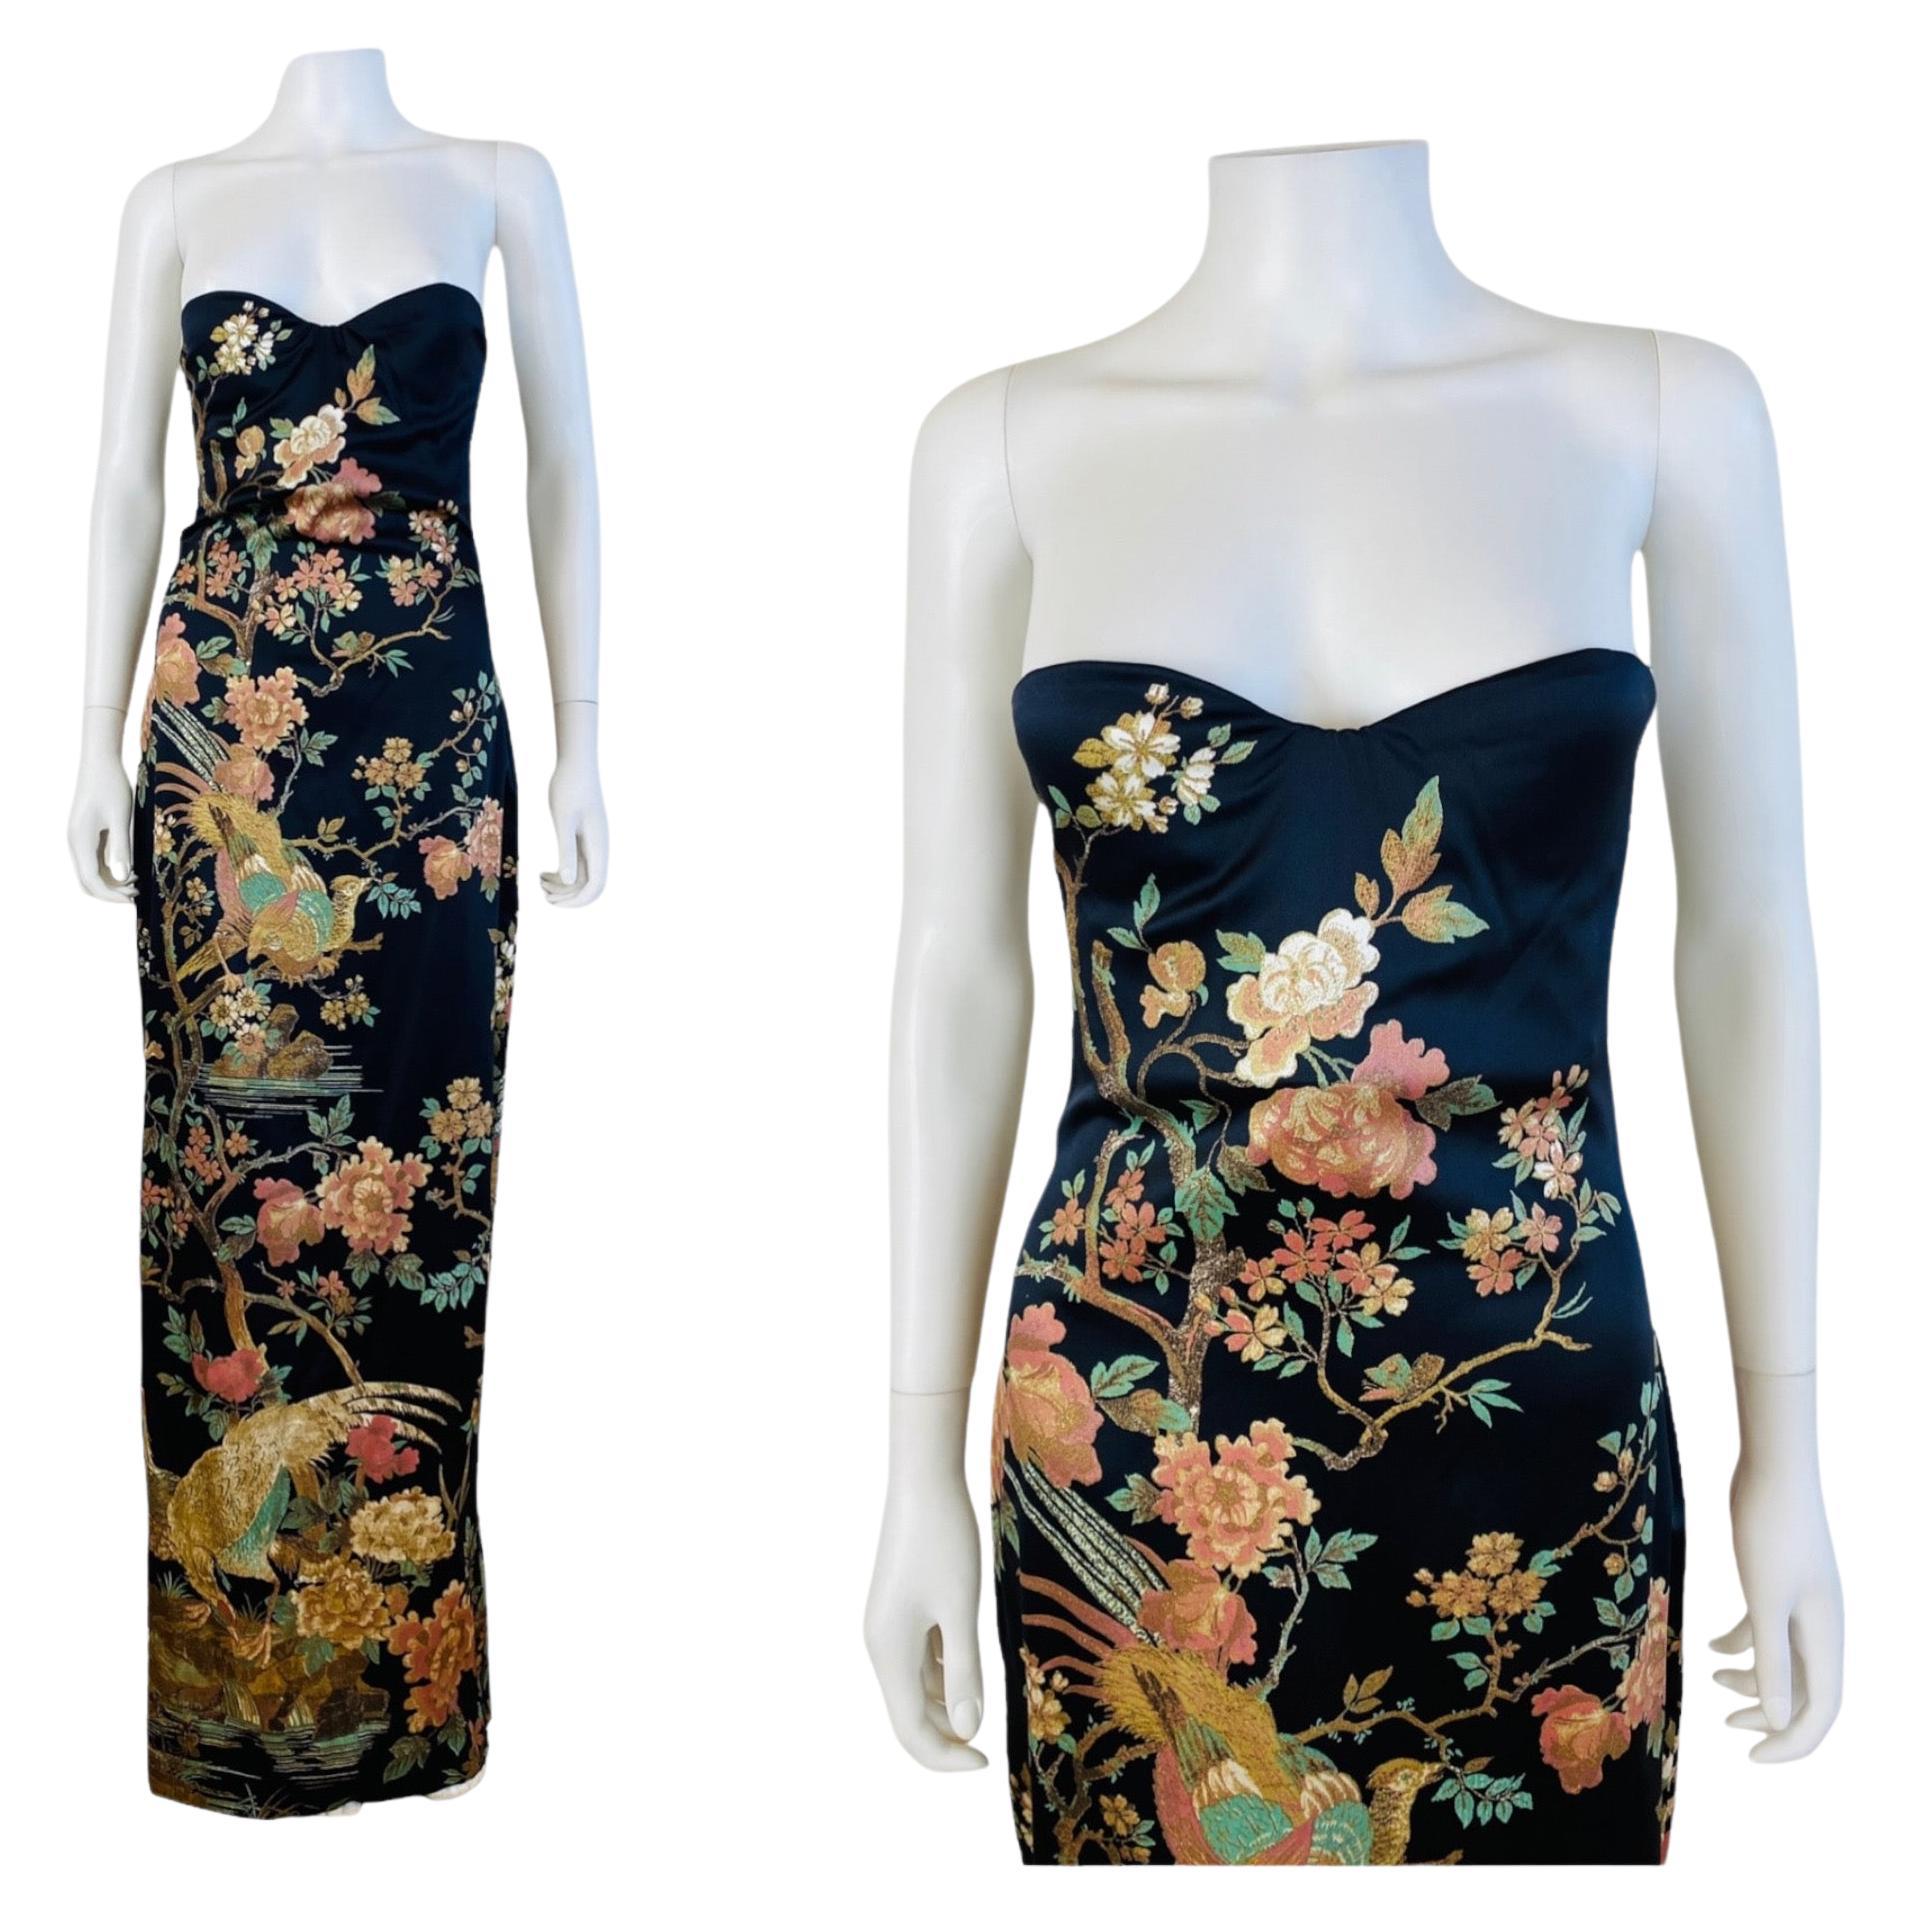 Stunning F/W 2006 Roberto Cavalli Dress with original tags (pinned to mannequin)
Black silk + elastane fabric with oversized floral + pheasant print 
This is a silk satin style fabric
Hand painted style print with gold accents
Sleeveless 
Sweetheart